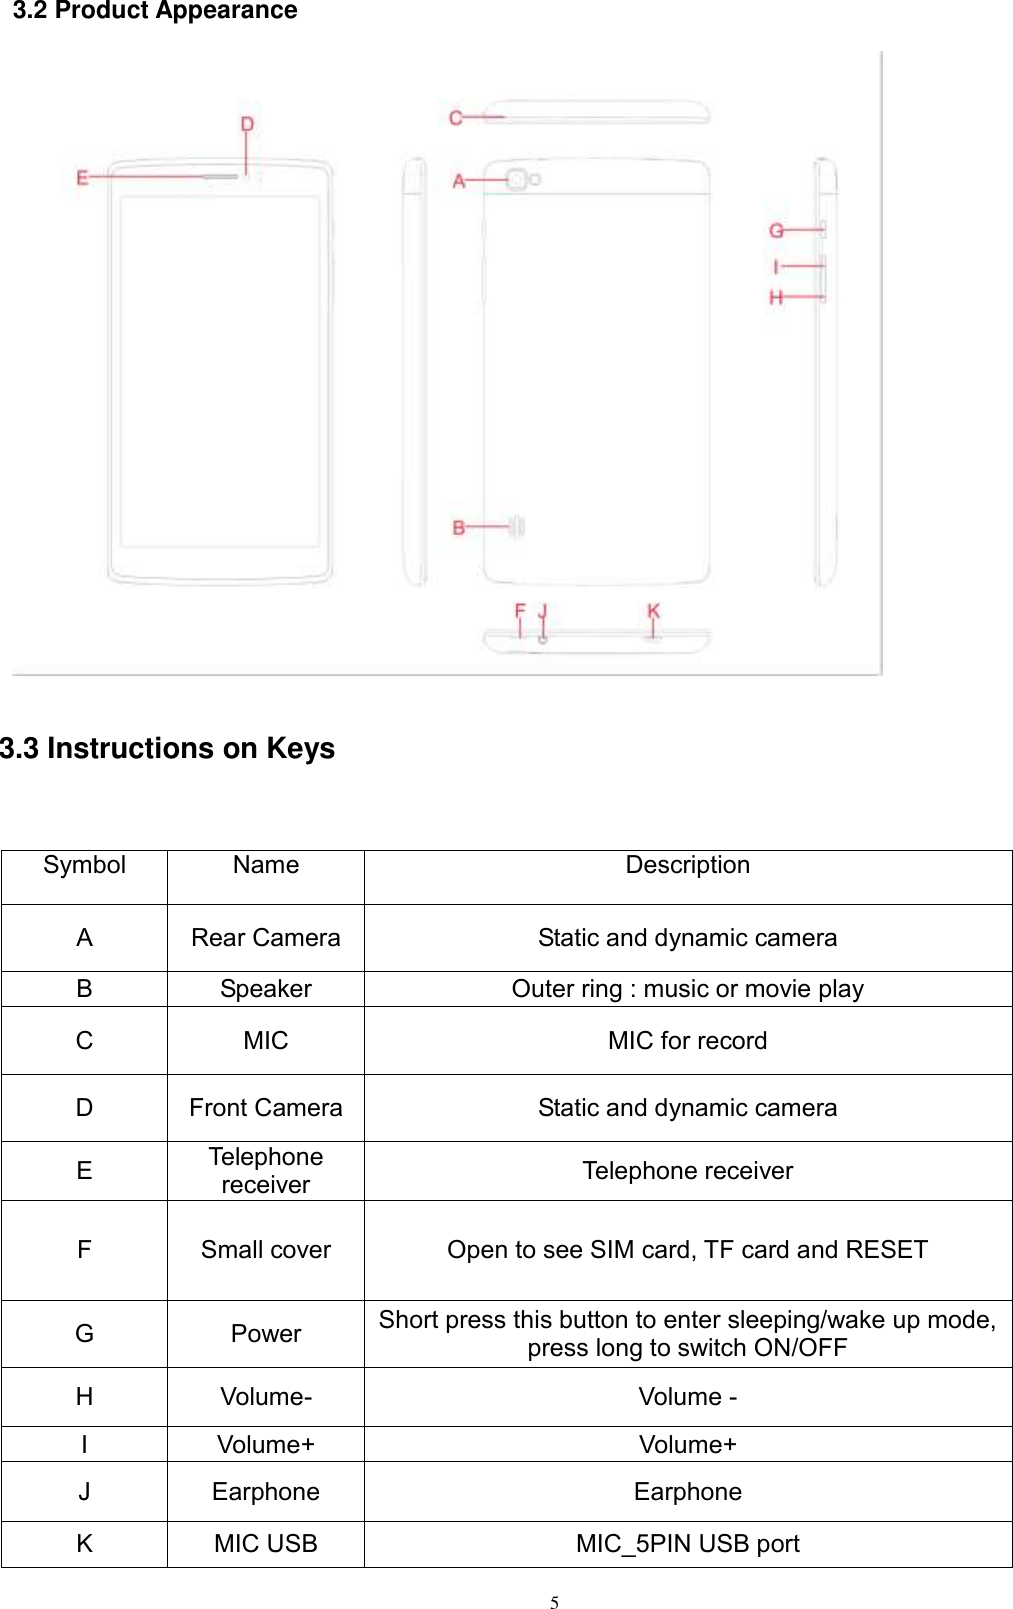      5 3.2 Product Appearance   3.3 Instructions on Keys   Symbol Name Description A Rear Camera Static and dynamic camera B Speaker Outer ring : music or movie play C MIC MIC for record D Front Camera Static and dynamic camera E Telephone receiver Telephone receiver F Small cover Open to see SIM card, TF card and RESET G Power Short press this button to enter sleeping/wake up mode, press long to switch ON/OFF H Volume- Volume - I Volume+ Volume+ J Earphone Earphone K MIC USB MIC_5PIN USB port 